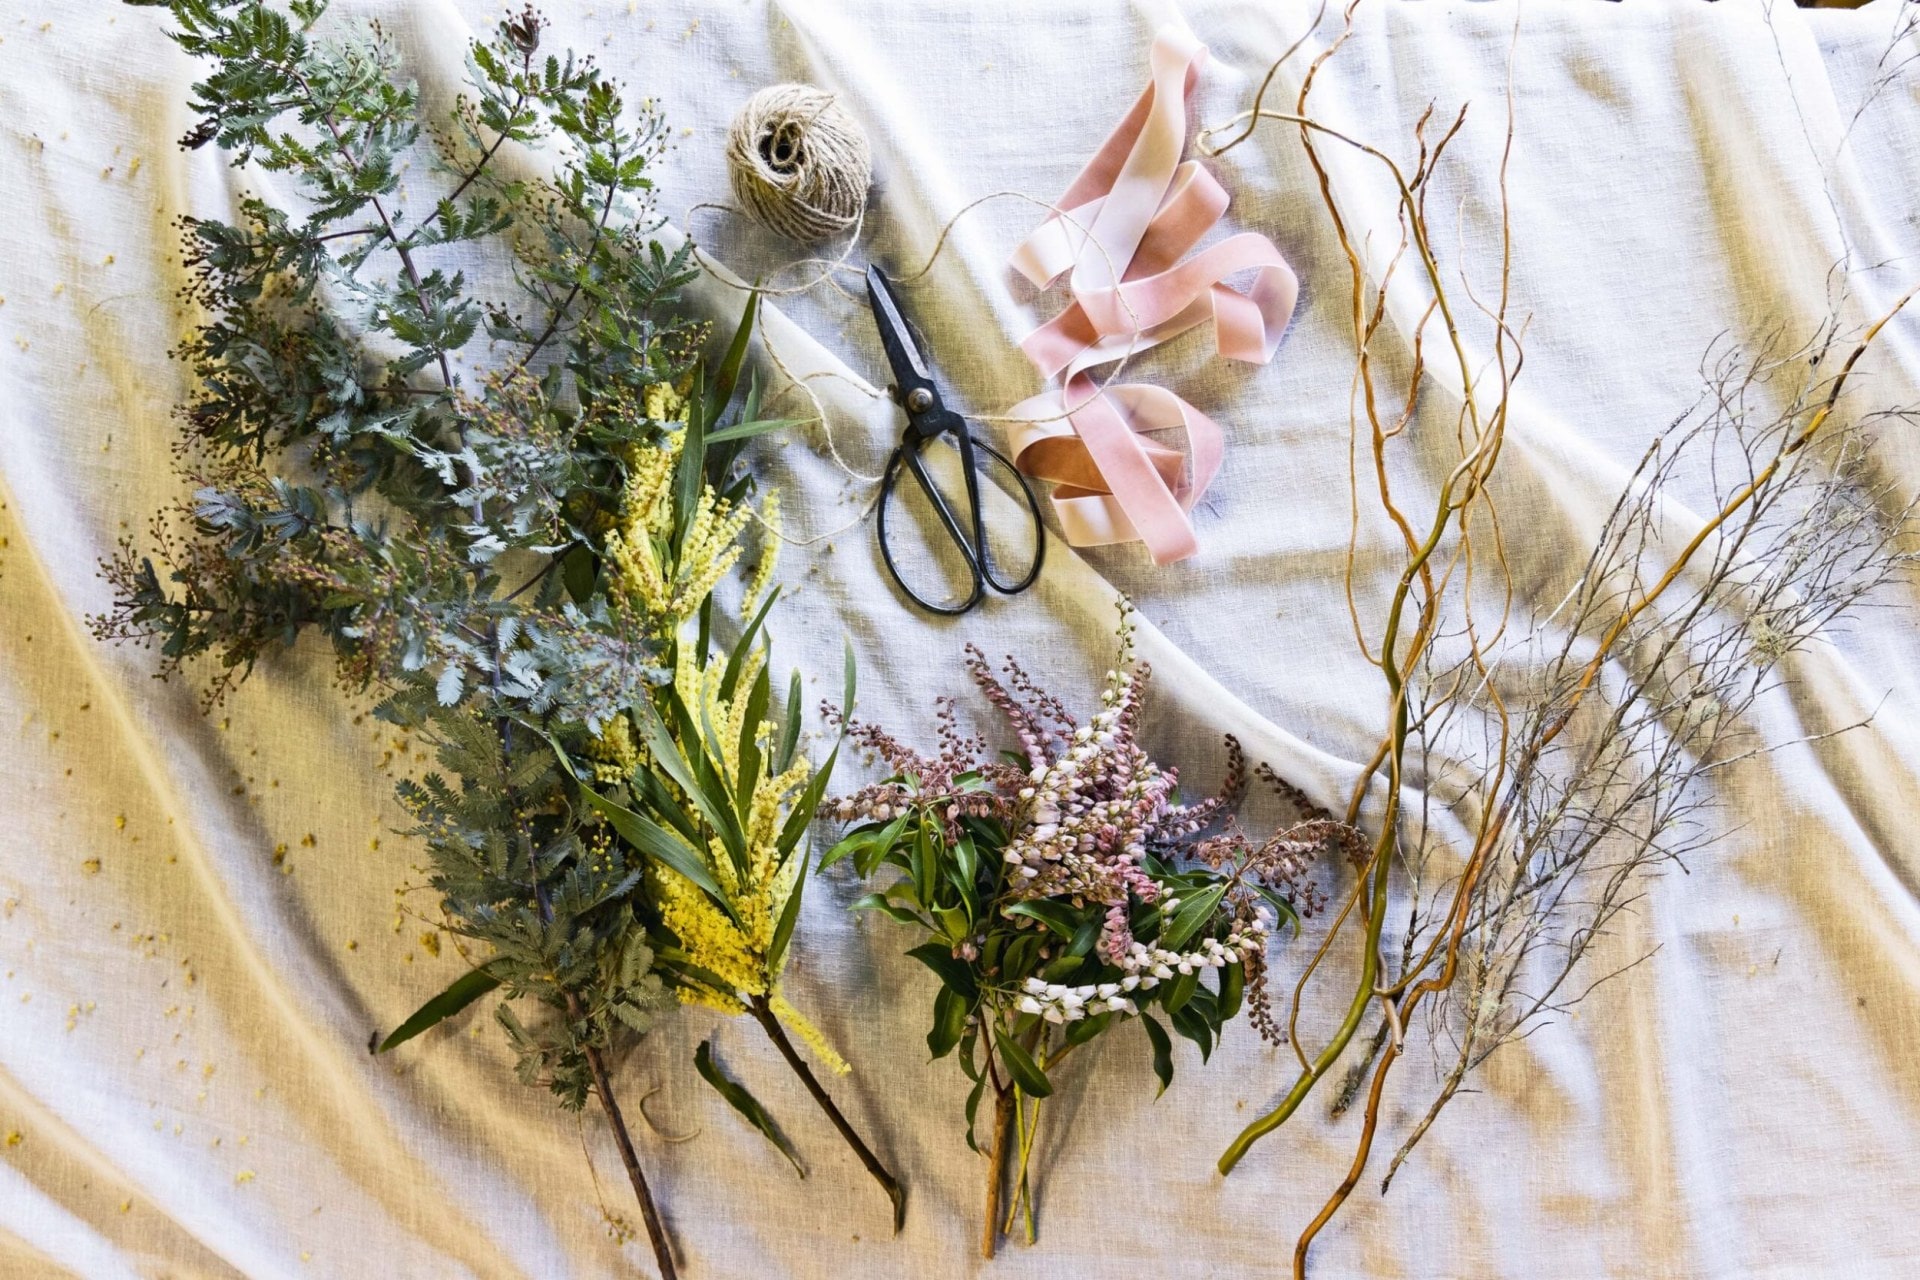 wreath making essentials including plant stems, flowers and ribbon